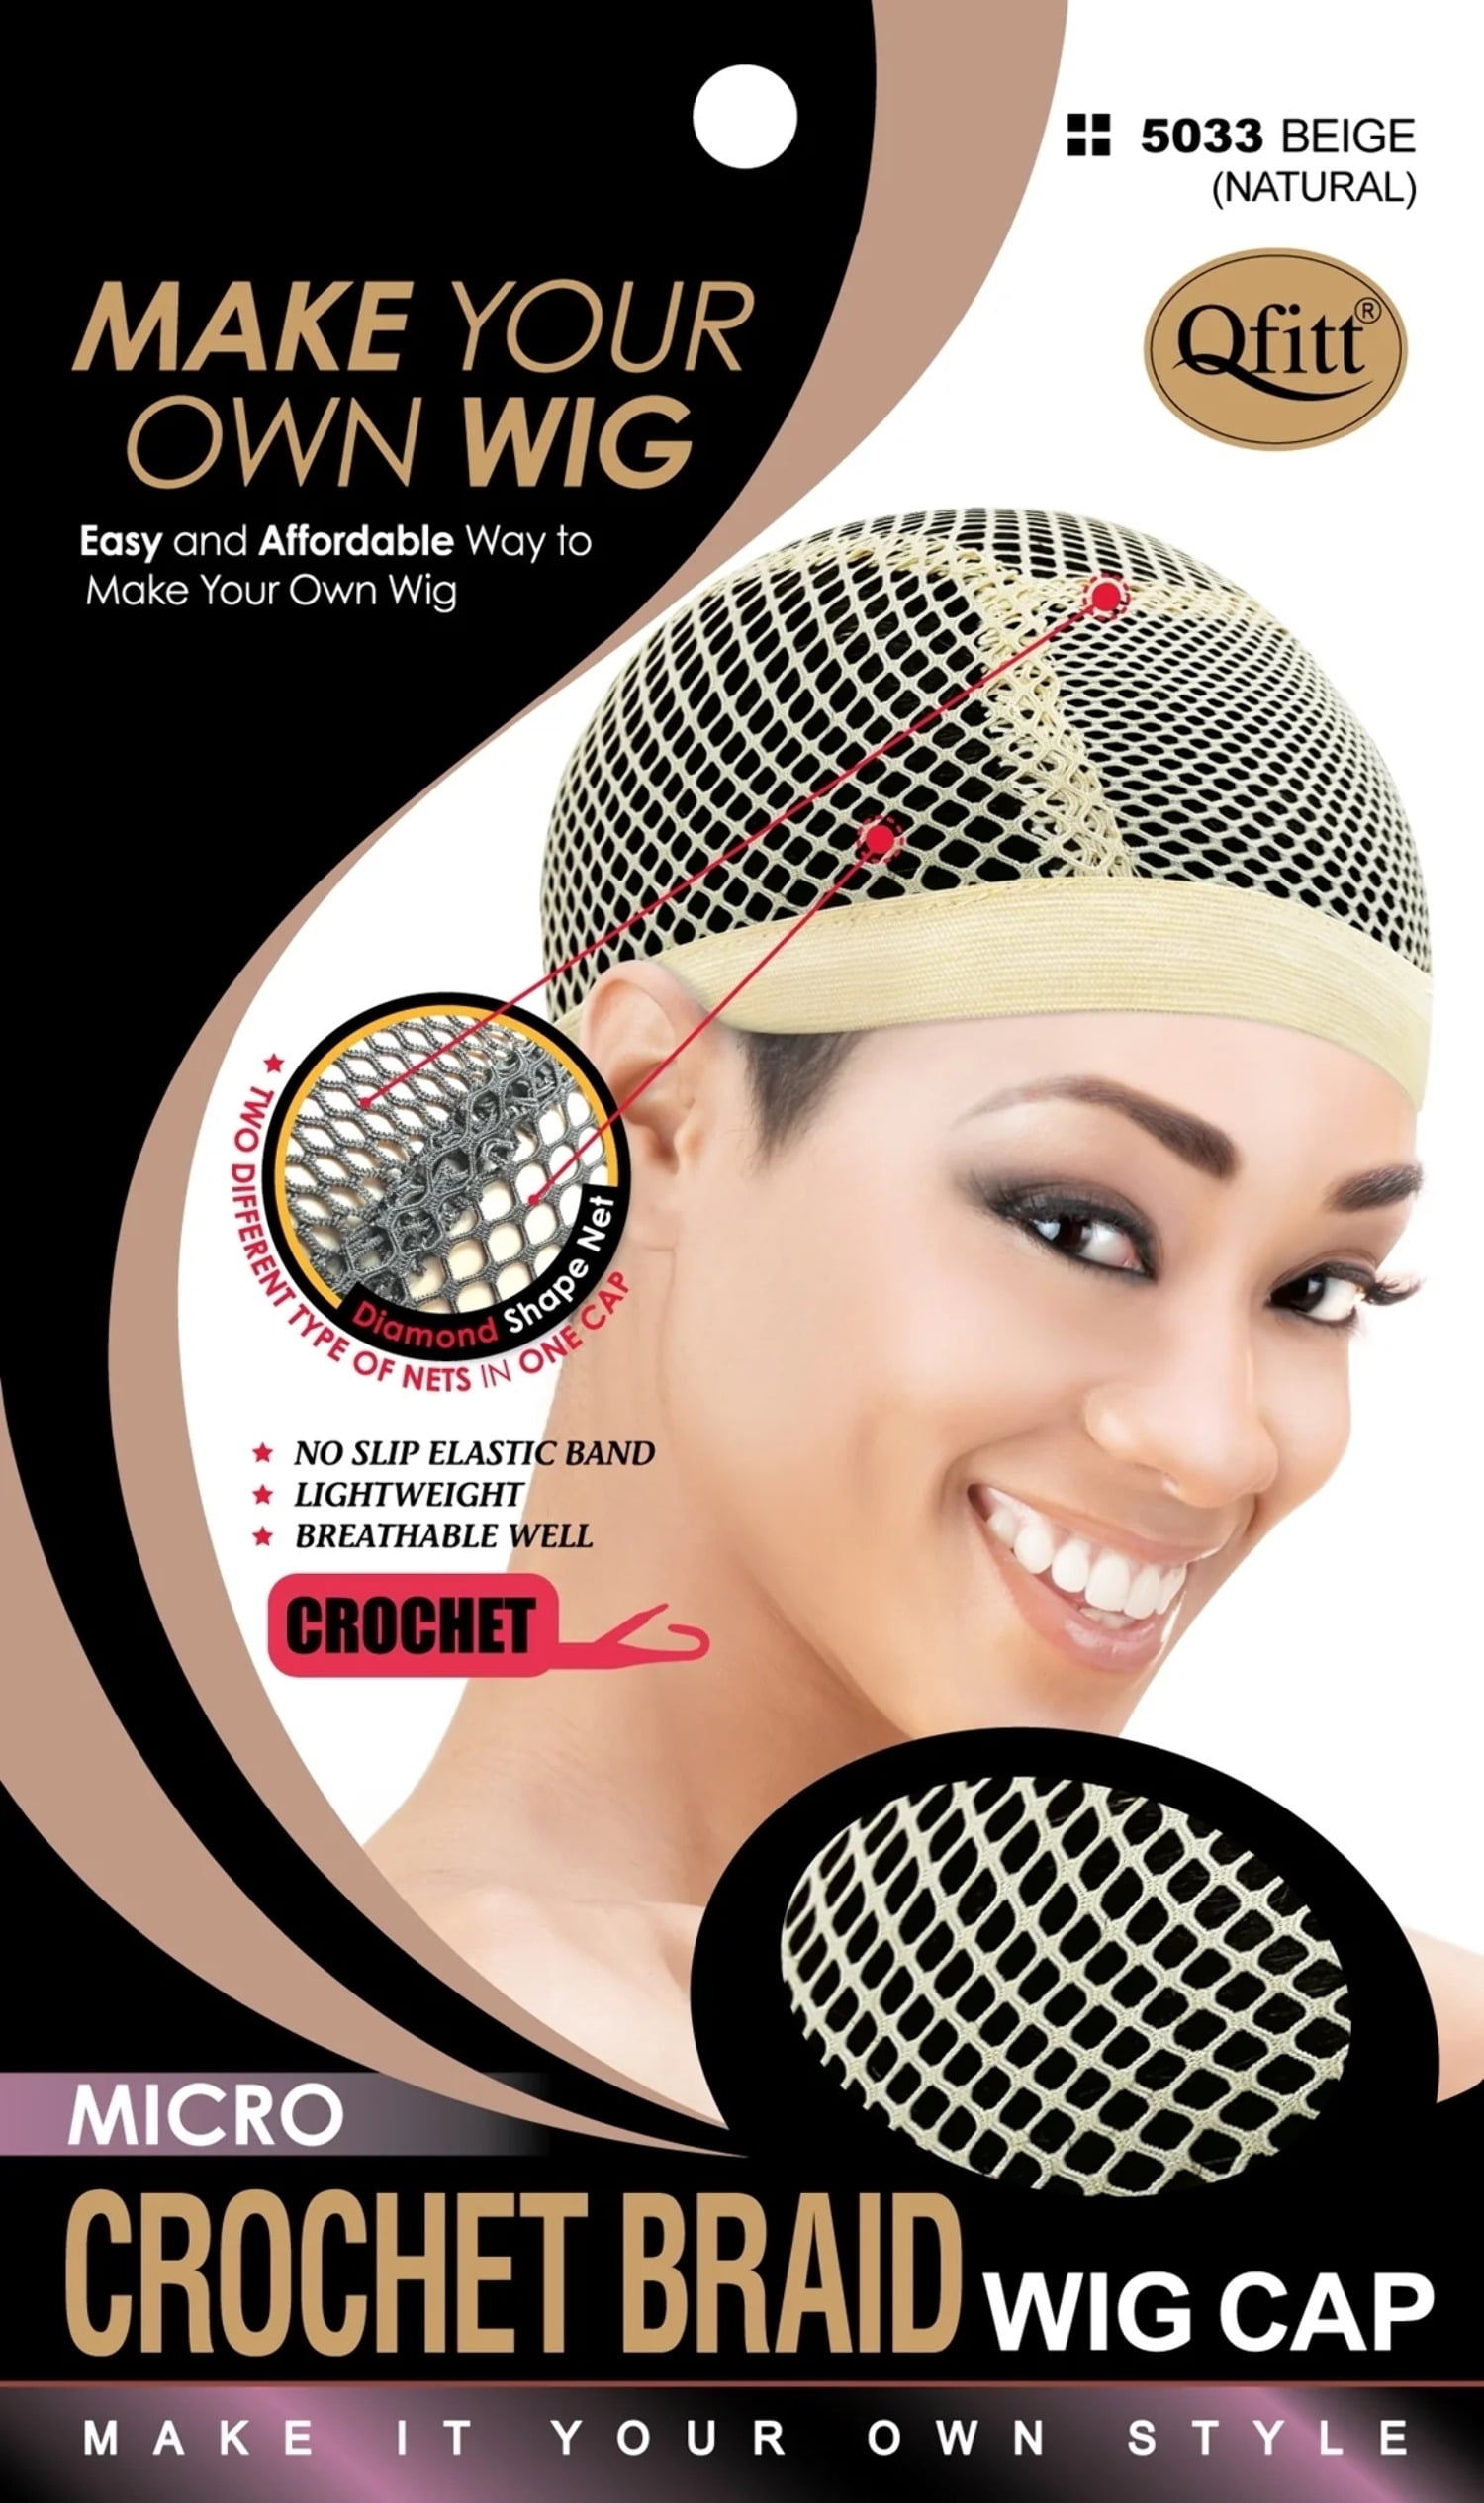 Qfitt Make Your Own Wig Sili Band Mesh Wig & Weave Cap 5005 Brown,Pack of 6